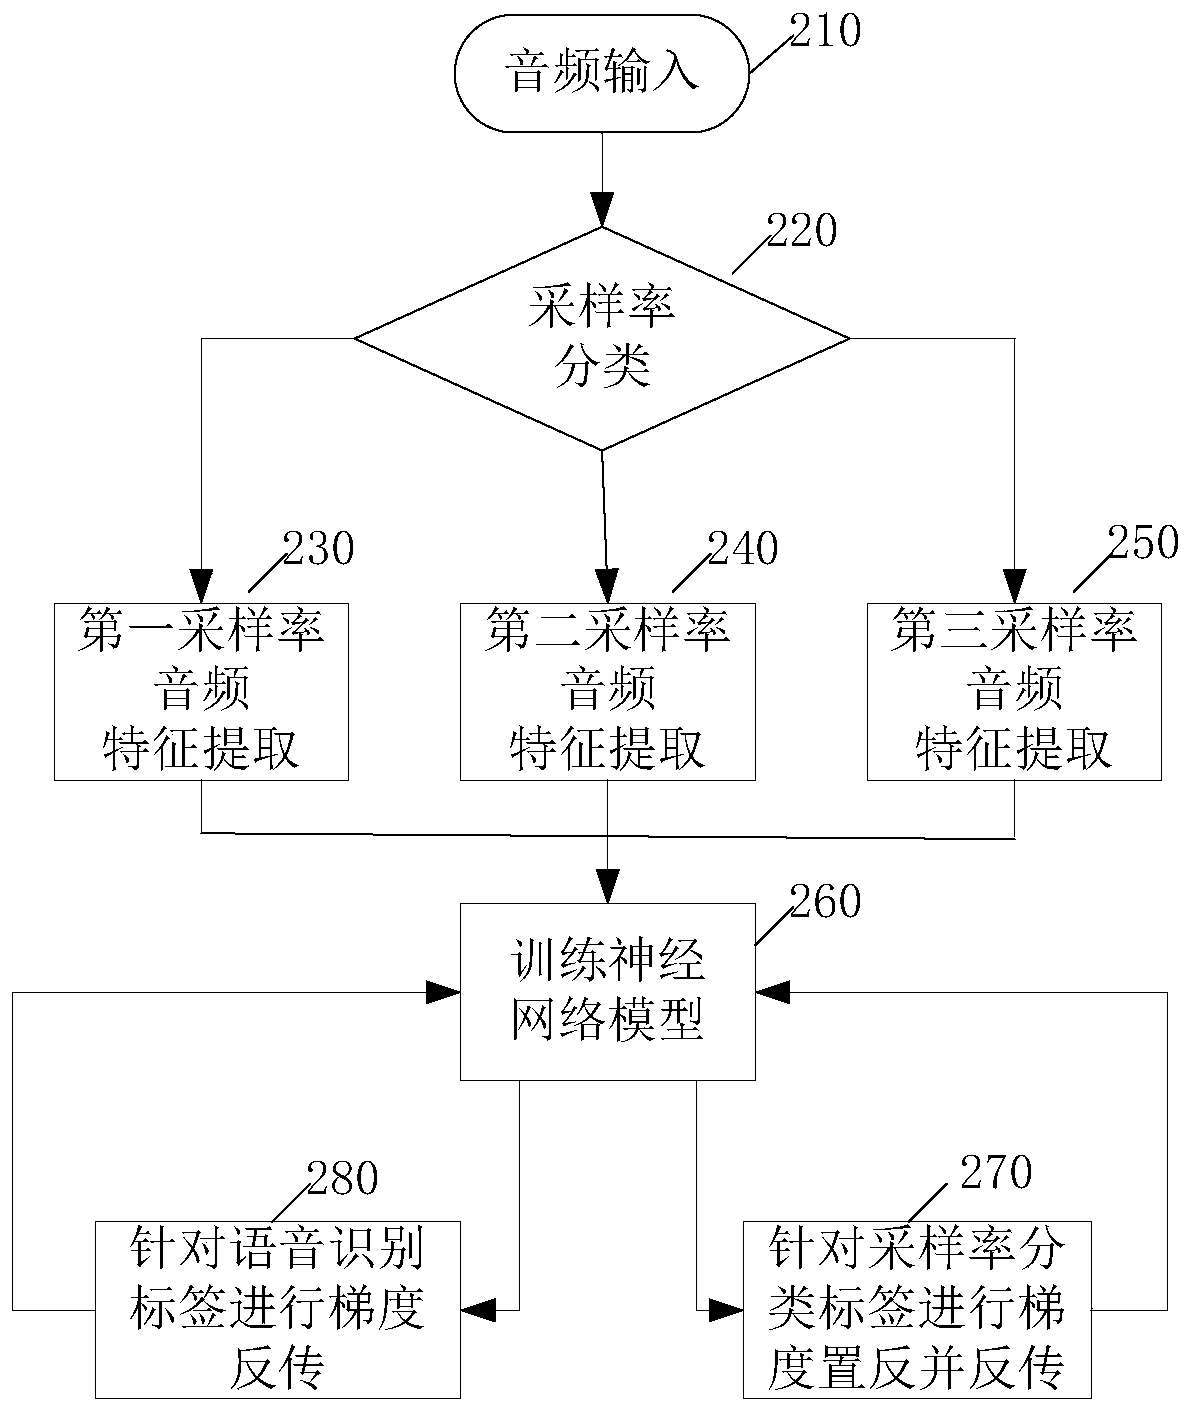 Multi-sampling-rate voice recognition method, device thereof and system and storage medium